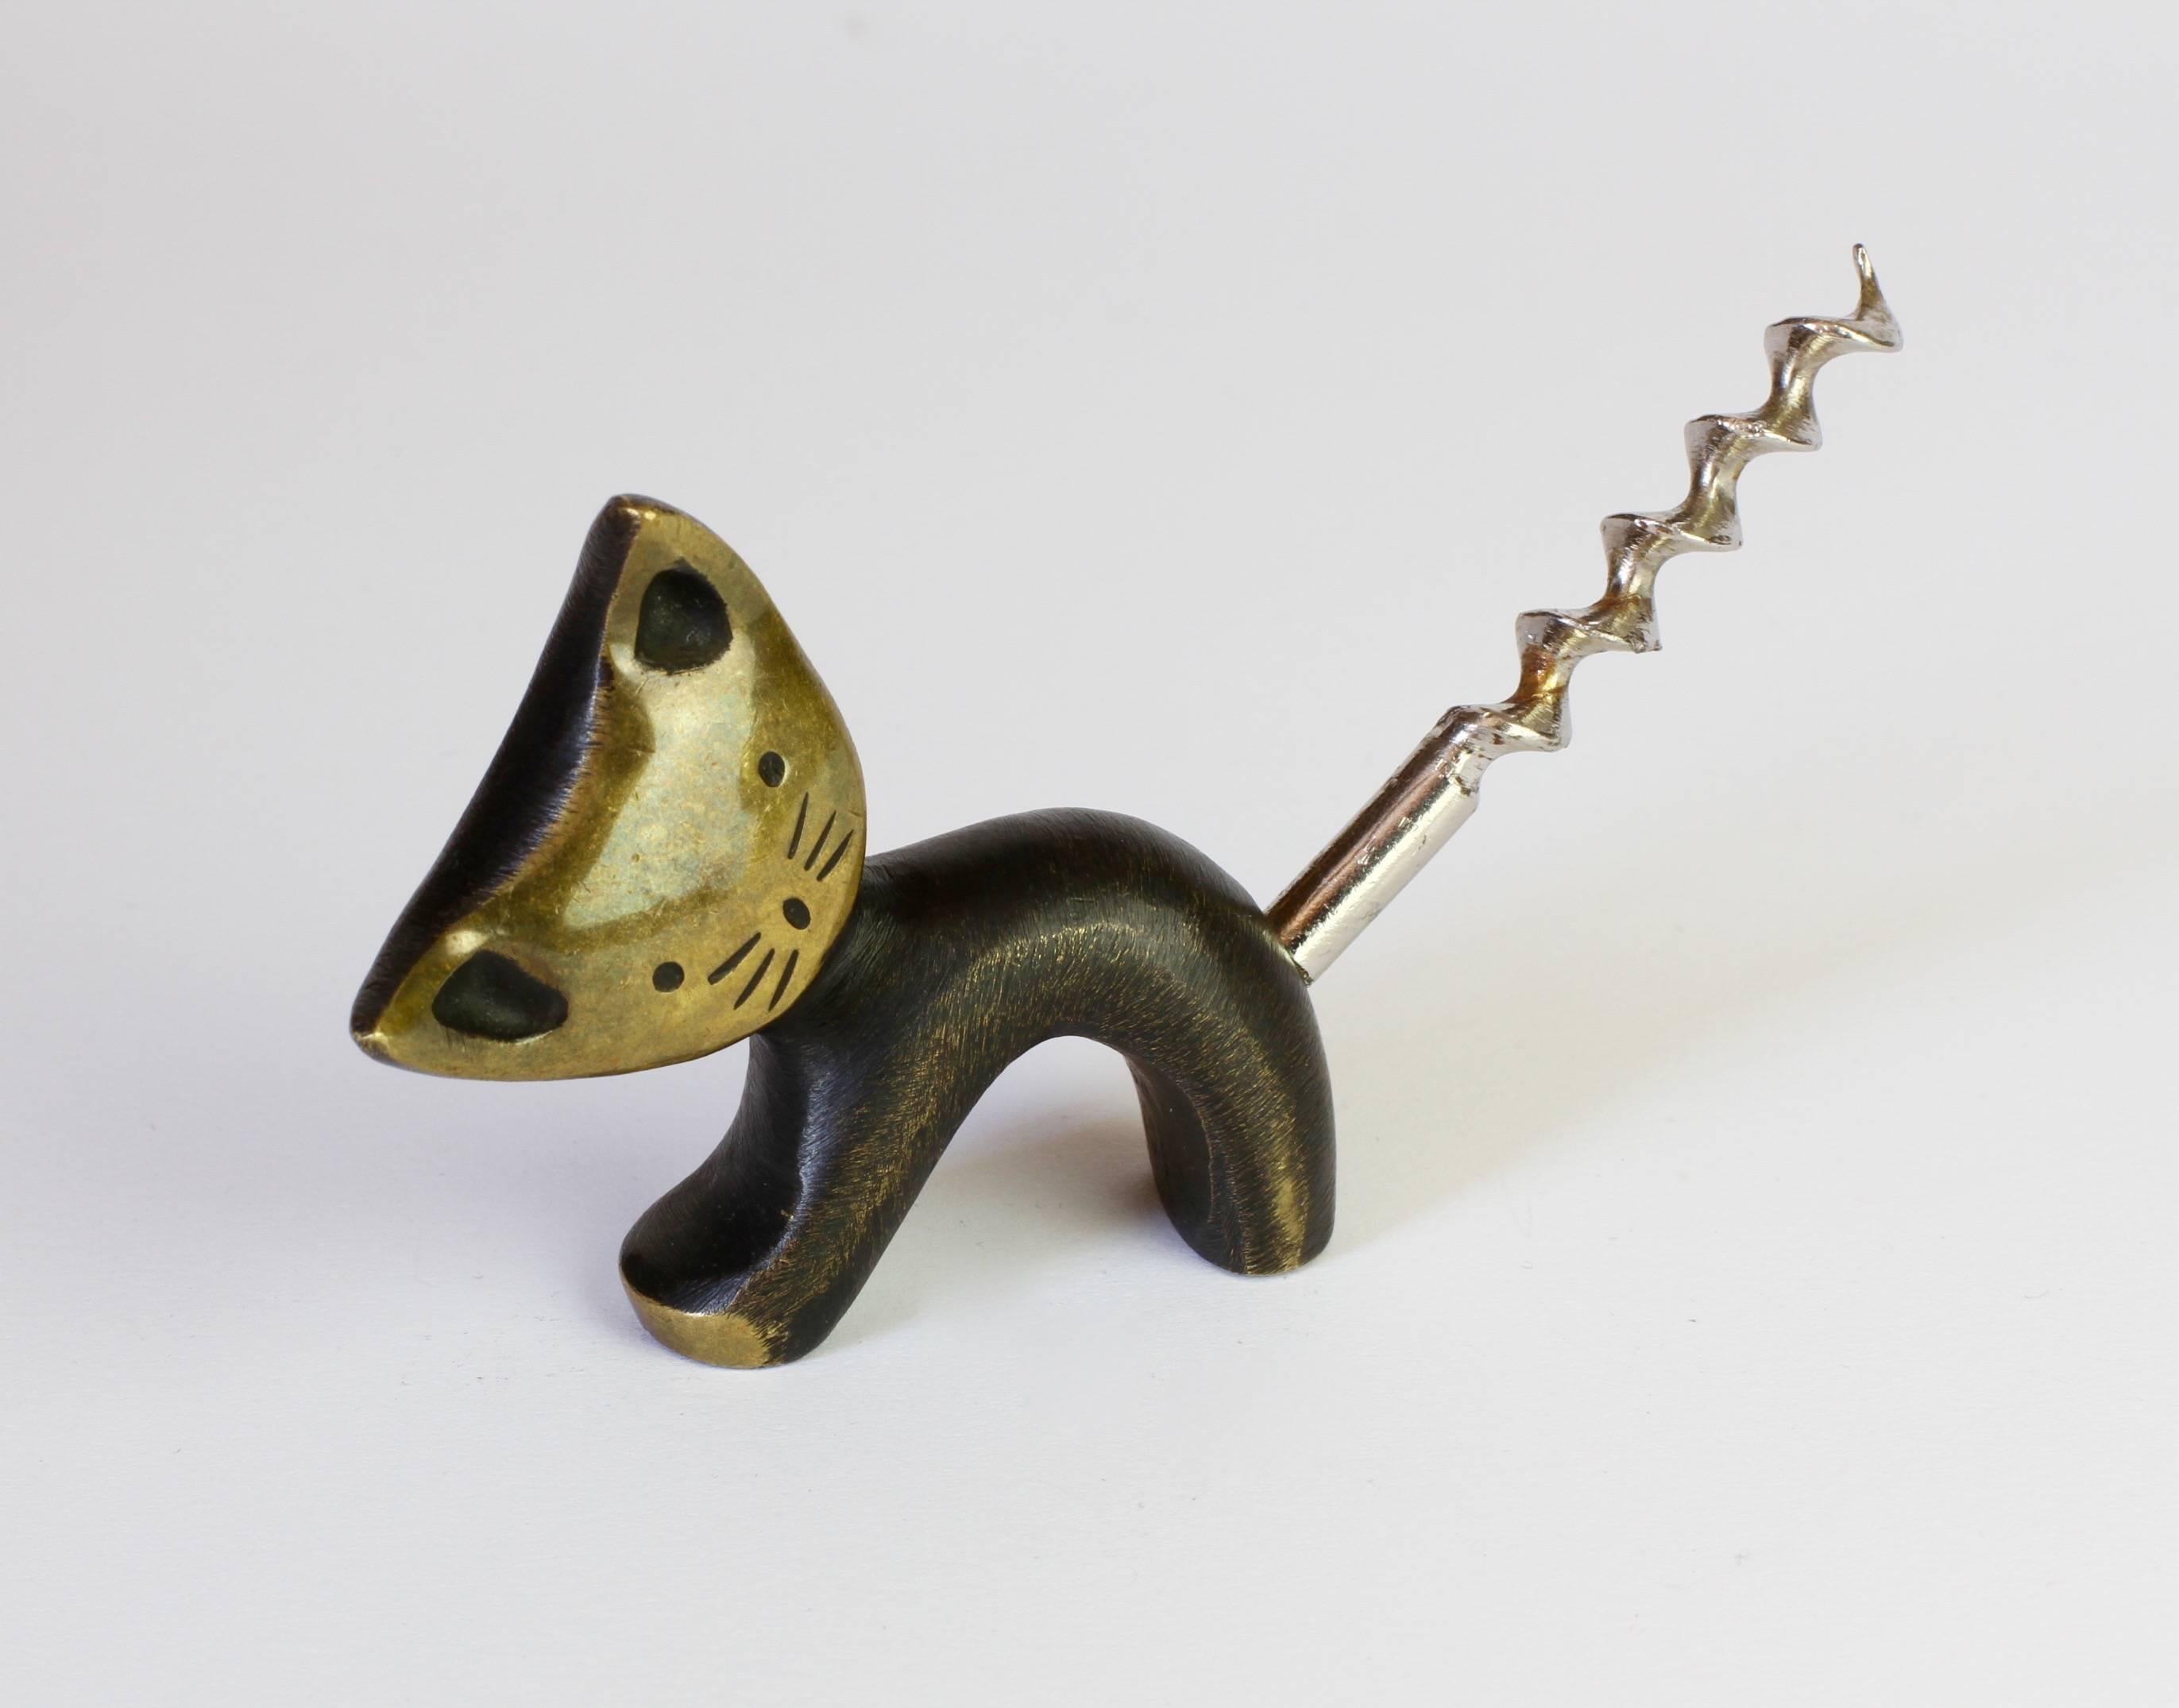 A Walter Bosse corkscrew in the form of a cat.

Walter Bosse's whimsical and playful designs have one the hearts of many a design fan/collector as they are perfectly practical and joyfully jest full. Bring back your inner child and rejoice in